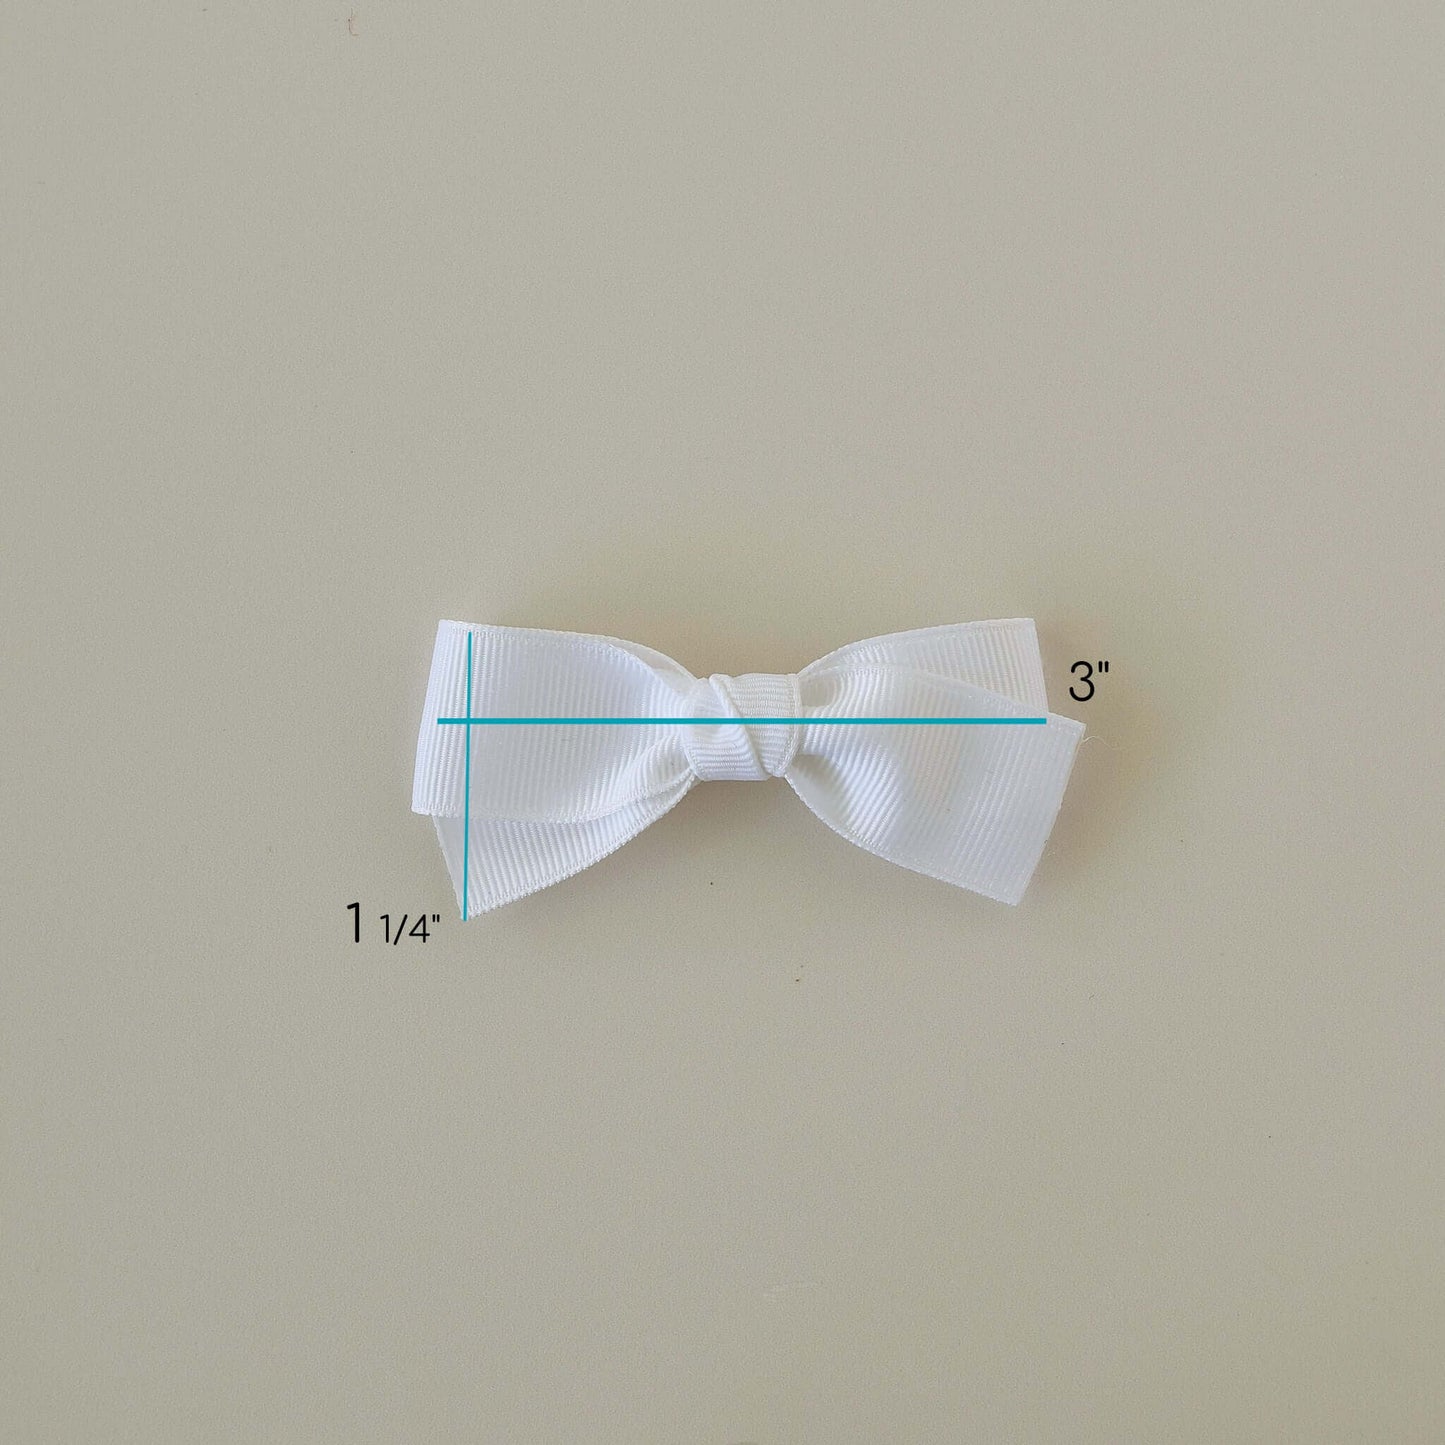 White 3 inch Grosgrain Baby Kayla Bow with alligator clip measuring guide on light background.